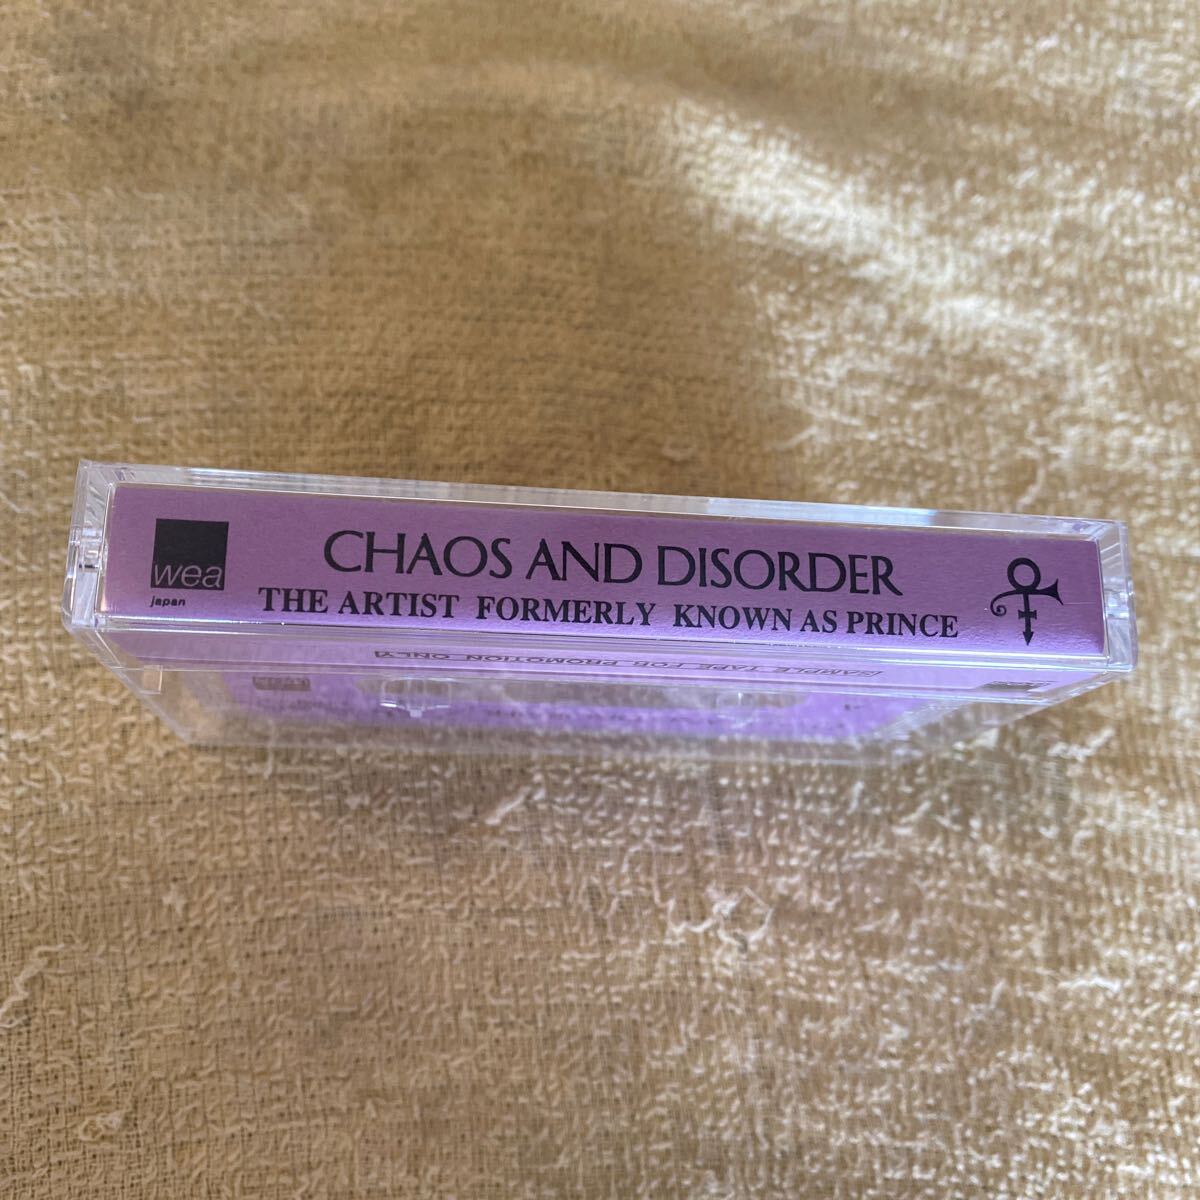 THE ARTIST FORMERLY KNOWN AS PRINCE / CHAOS AND DISORDER promo cassette tape 